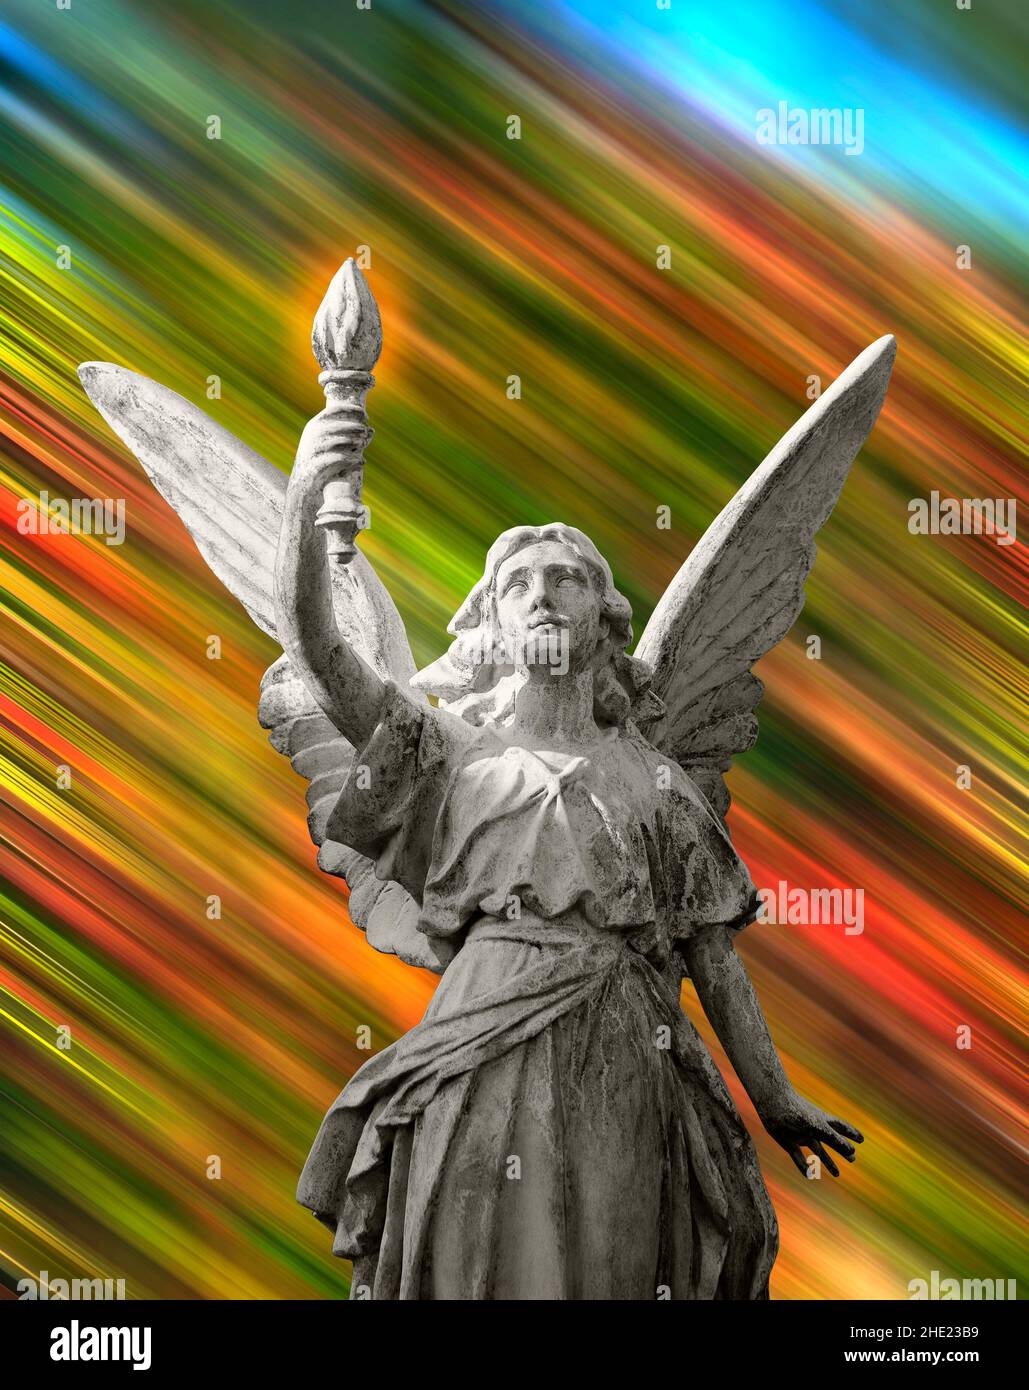 Statue is holding a torch that has an aura around it. Stock Photo